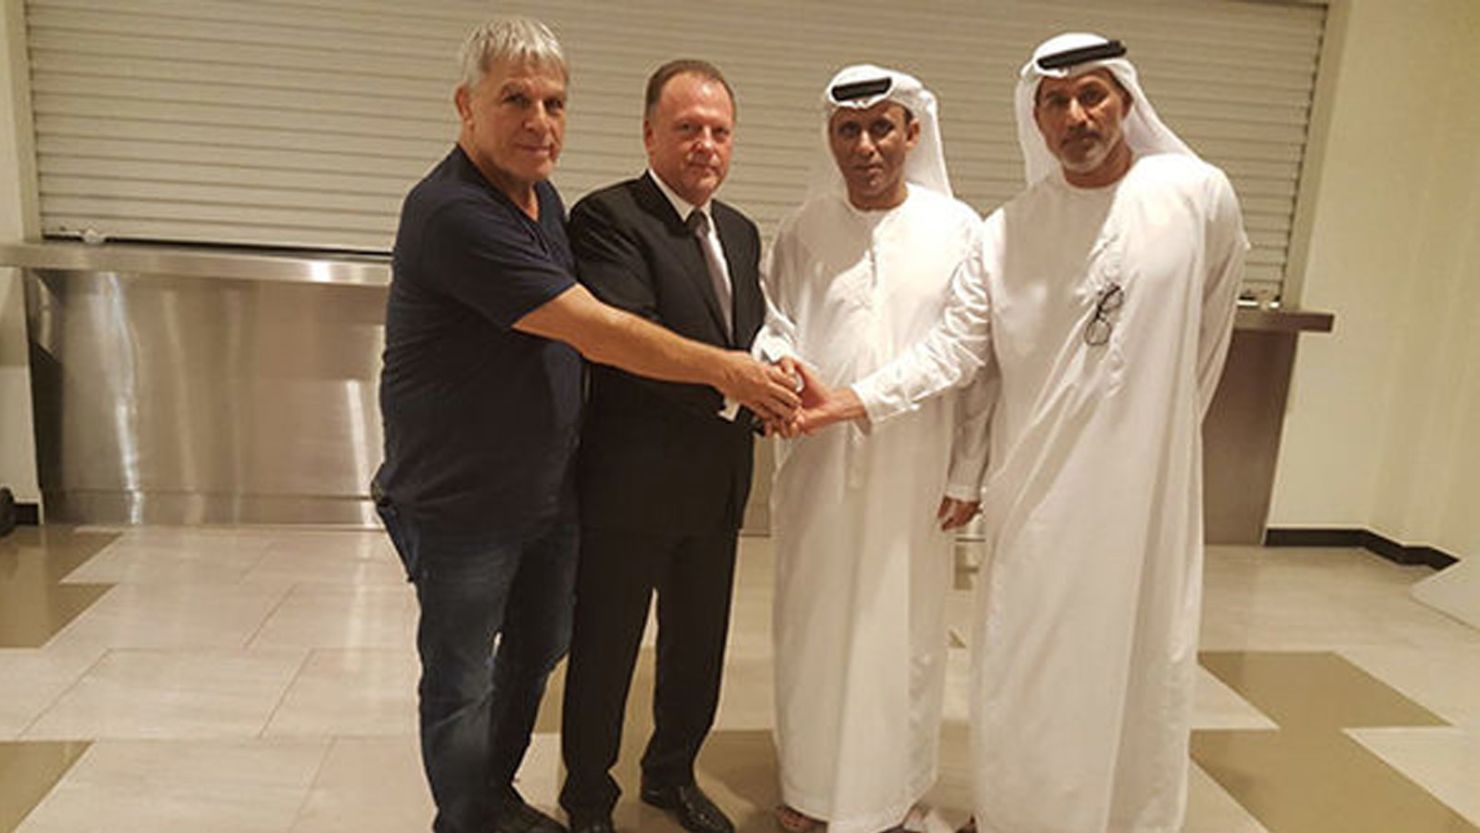  Israel's Judo Association President meets with Marius Vizer and two senior UAE sporting officials. 